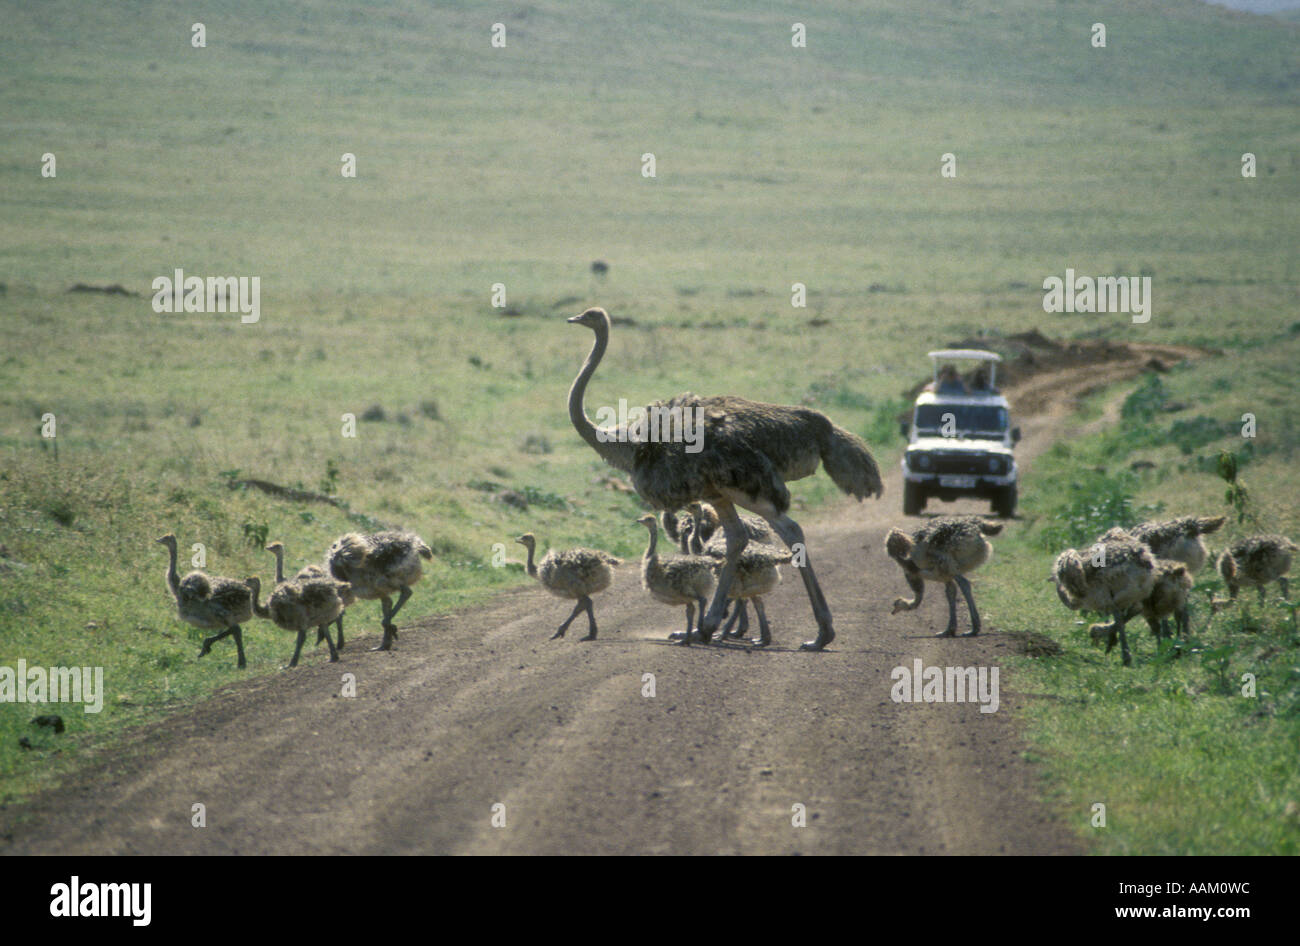 Female Masai Ostrich escorting her chicks across a dirt track ahead of a tourist vehicle Ngorongoro Crater Tanzania East Africa Stock Photo